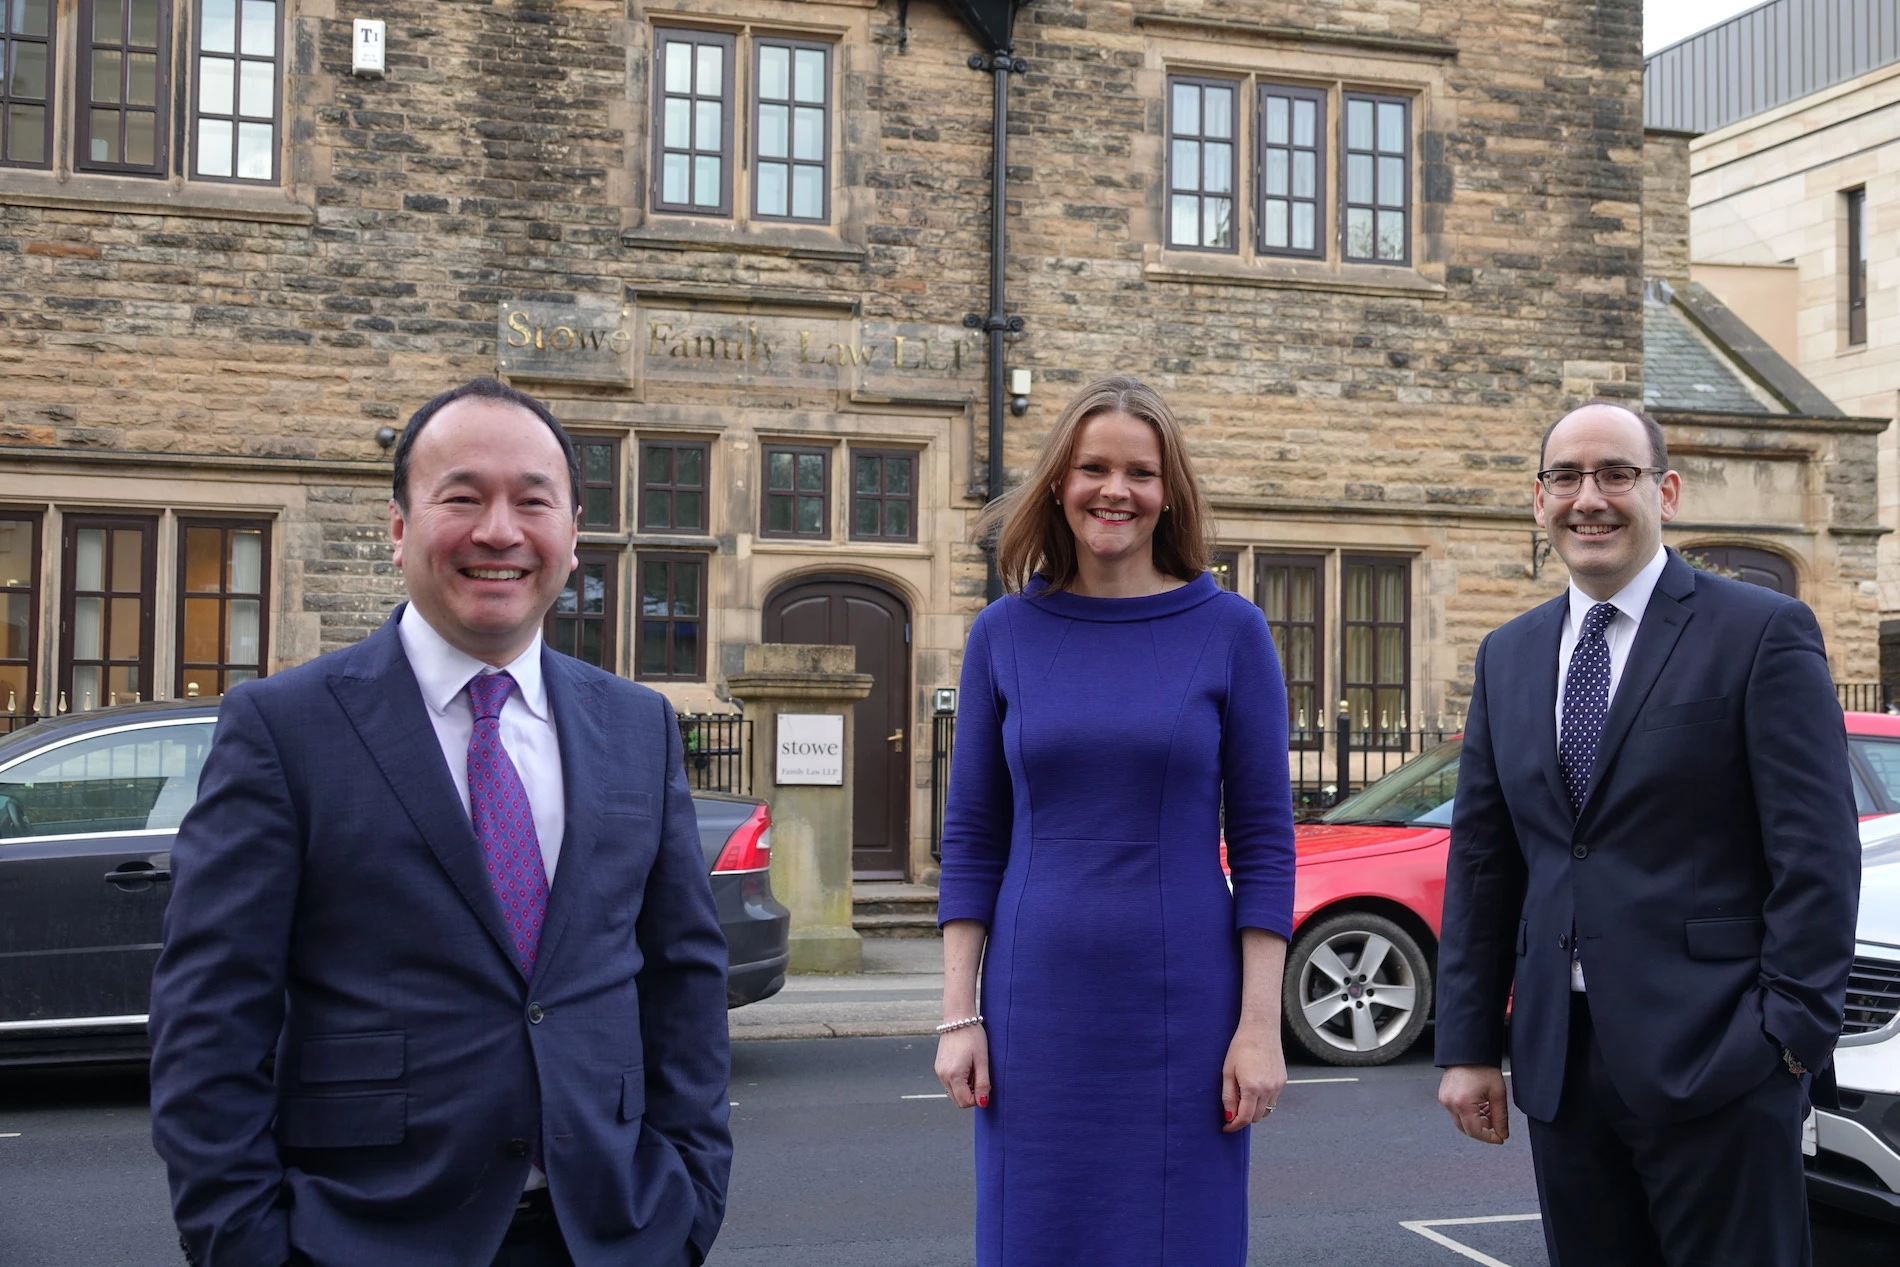  Stowe Family Law senior partner, Julian Hawkhead, Jemma Slavin, who is heading up the Bristol office, and Stowe Family Law CEO Charles Hartwell.